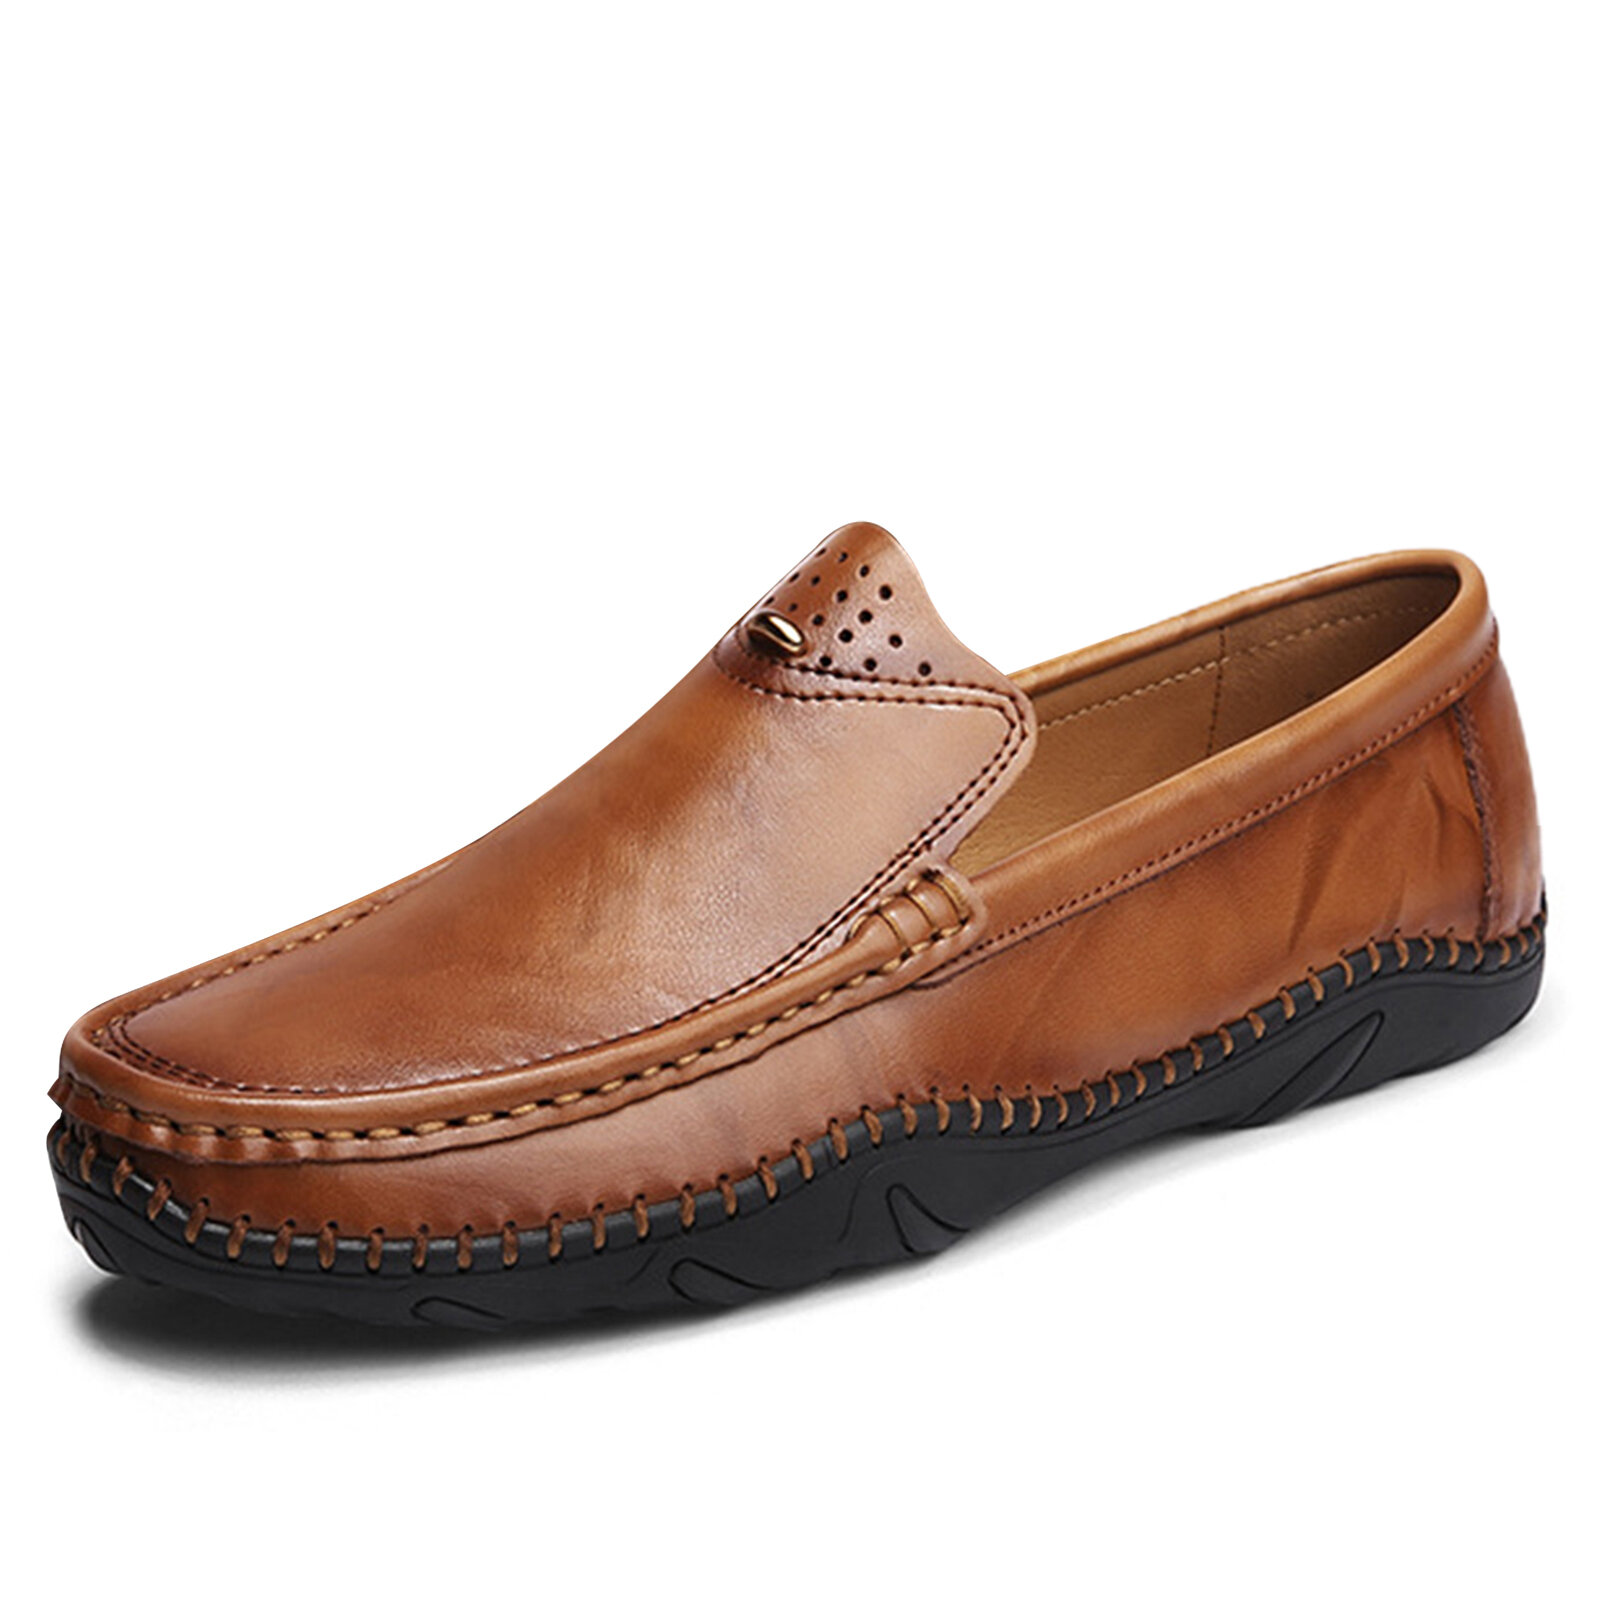 Menico Men Retro Genuine Leather Slip On Stitching Business Working Casual Driving Loafers Shoes